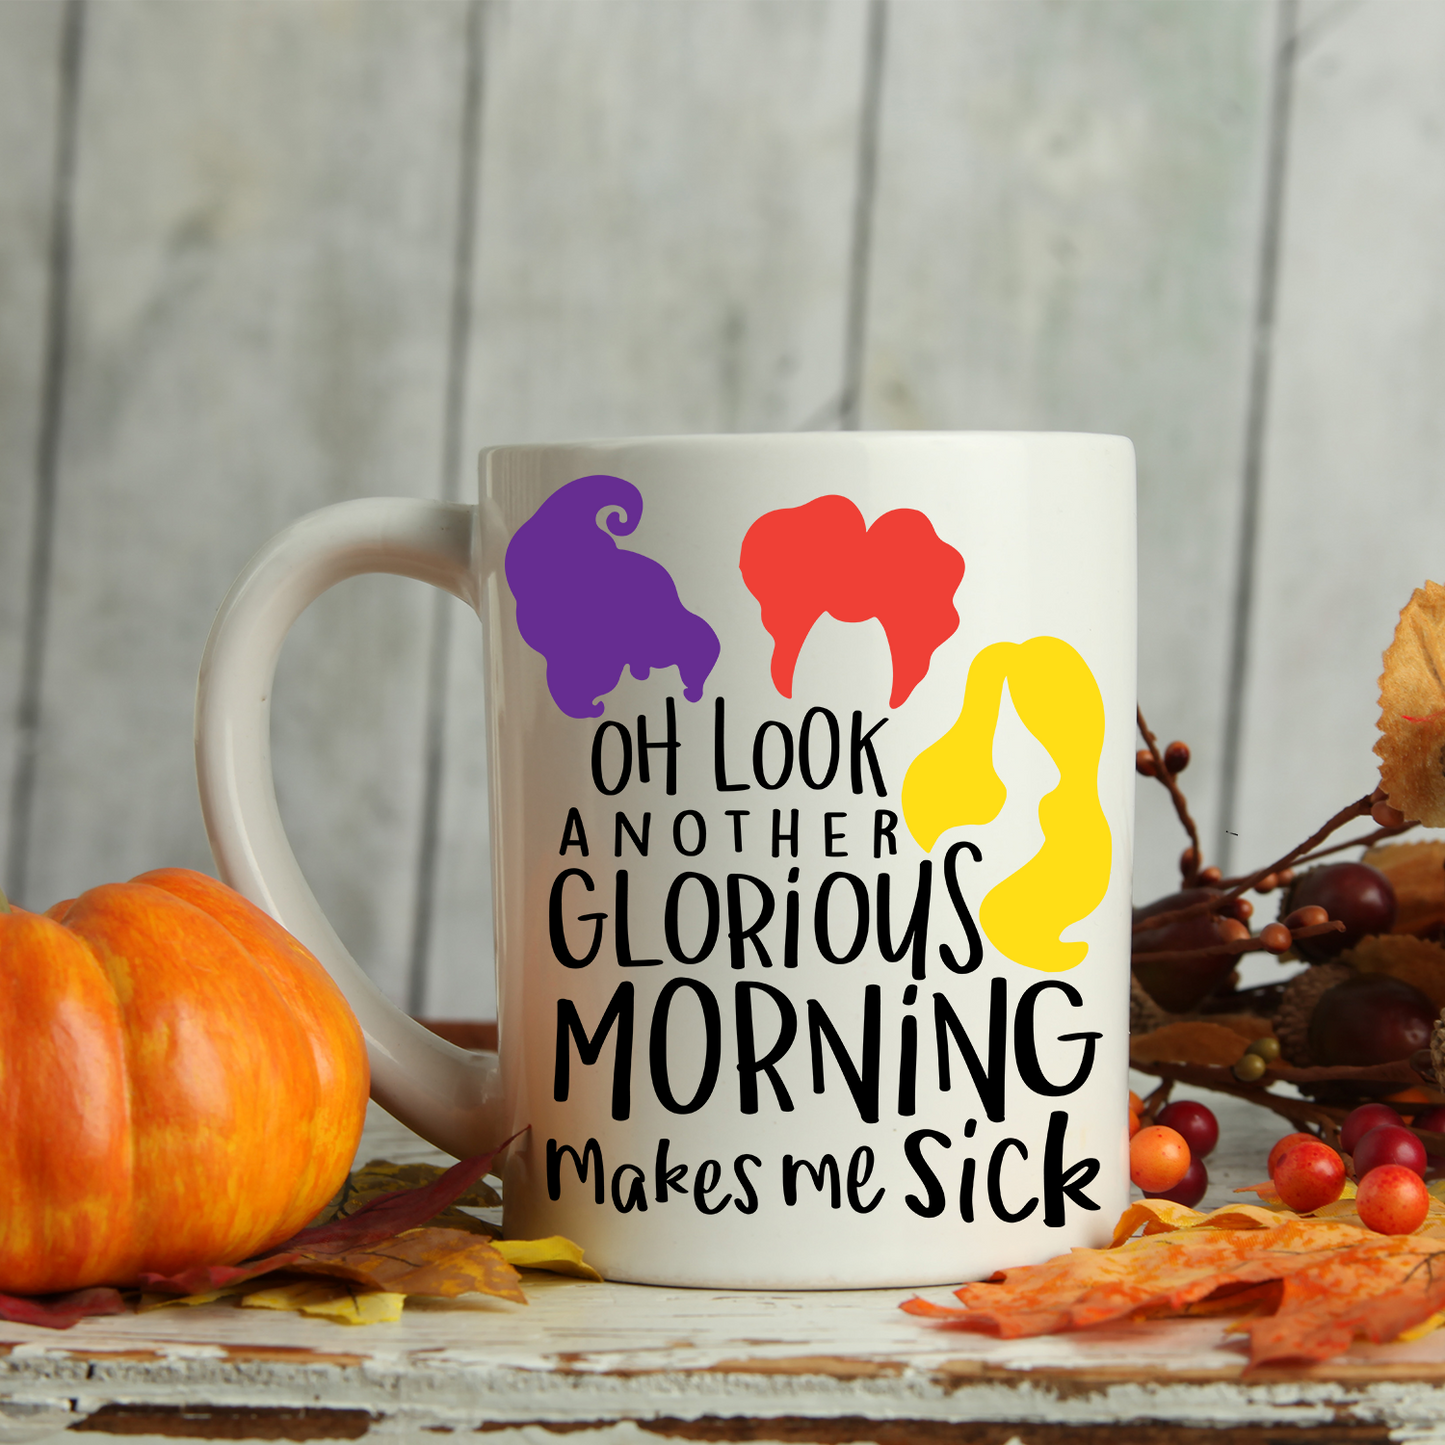 Oh look another glorious morning funny coffee/tea Mug.